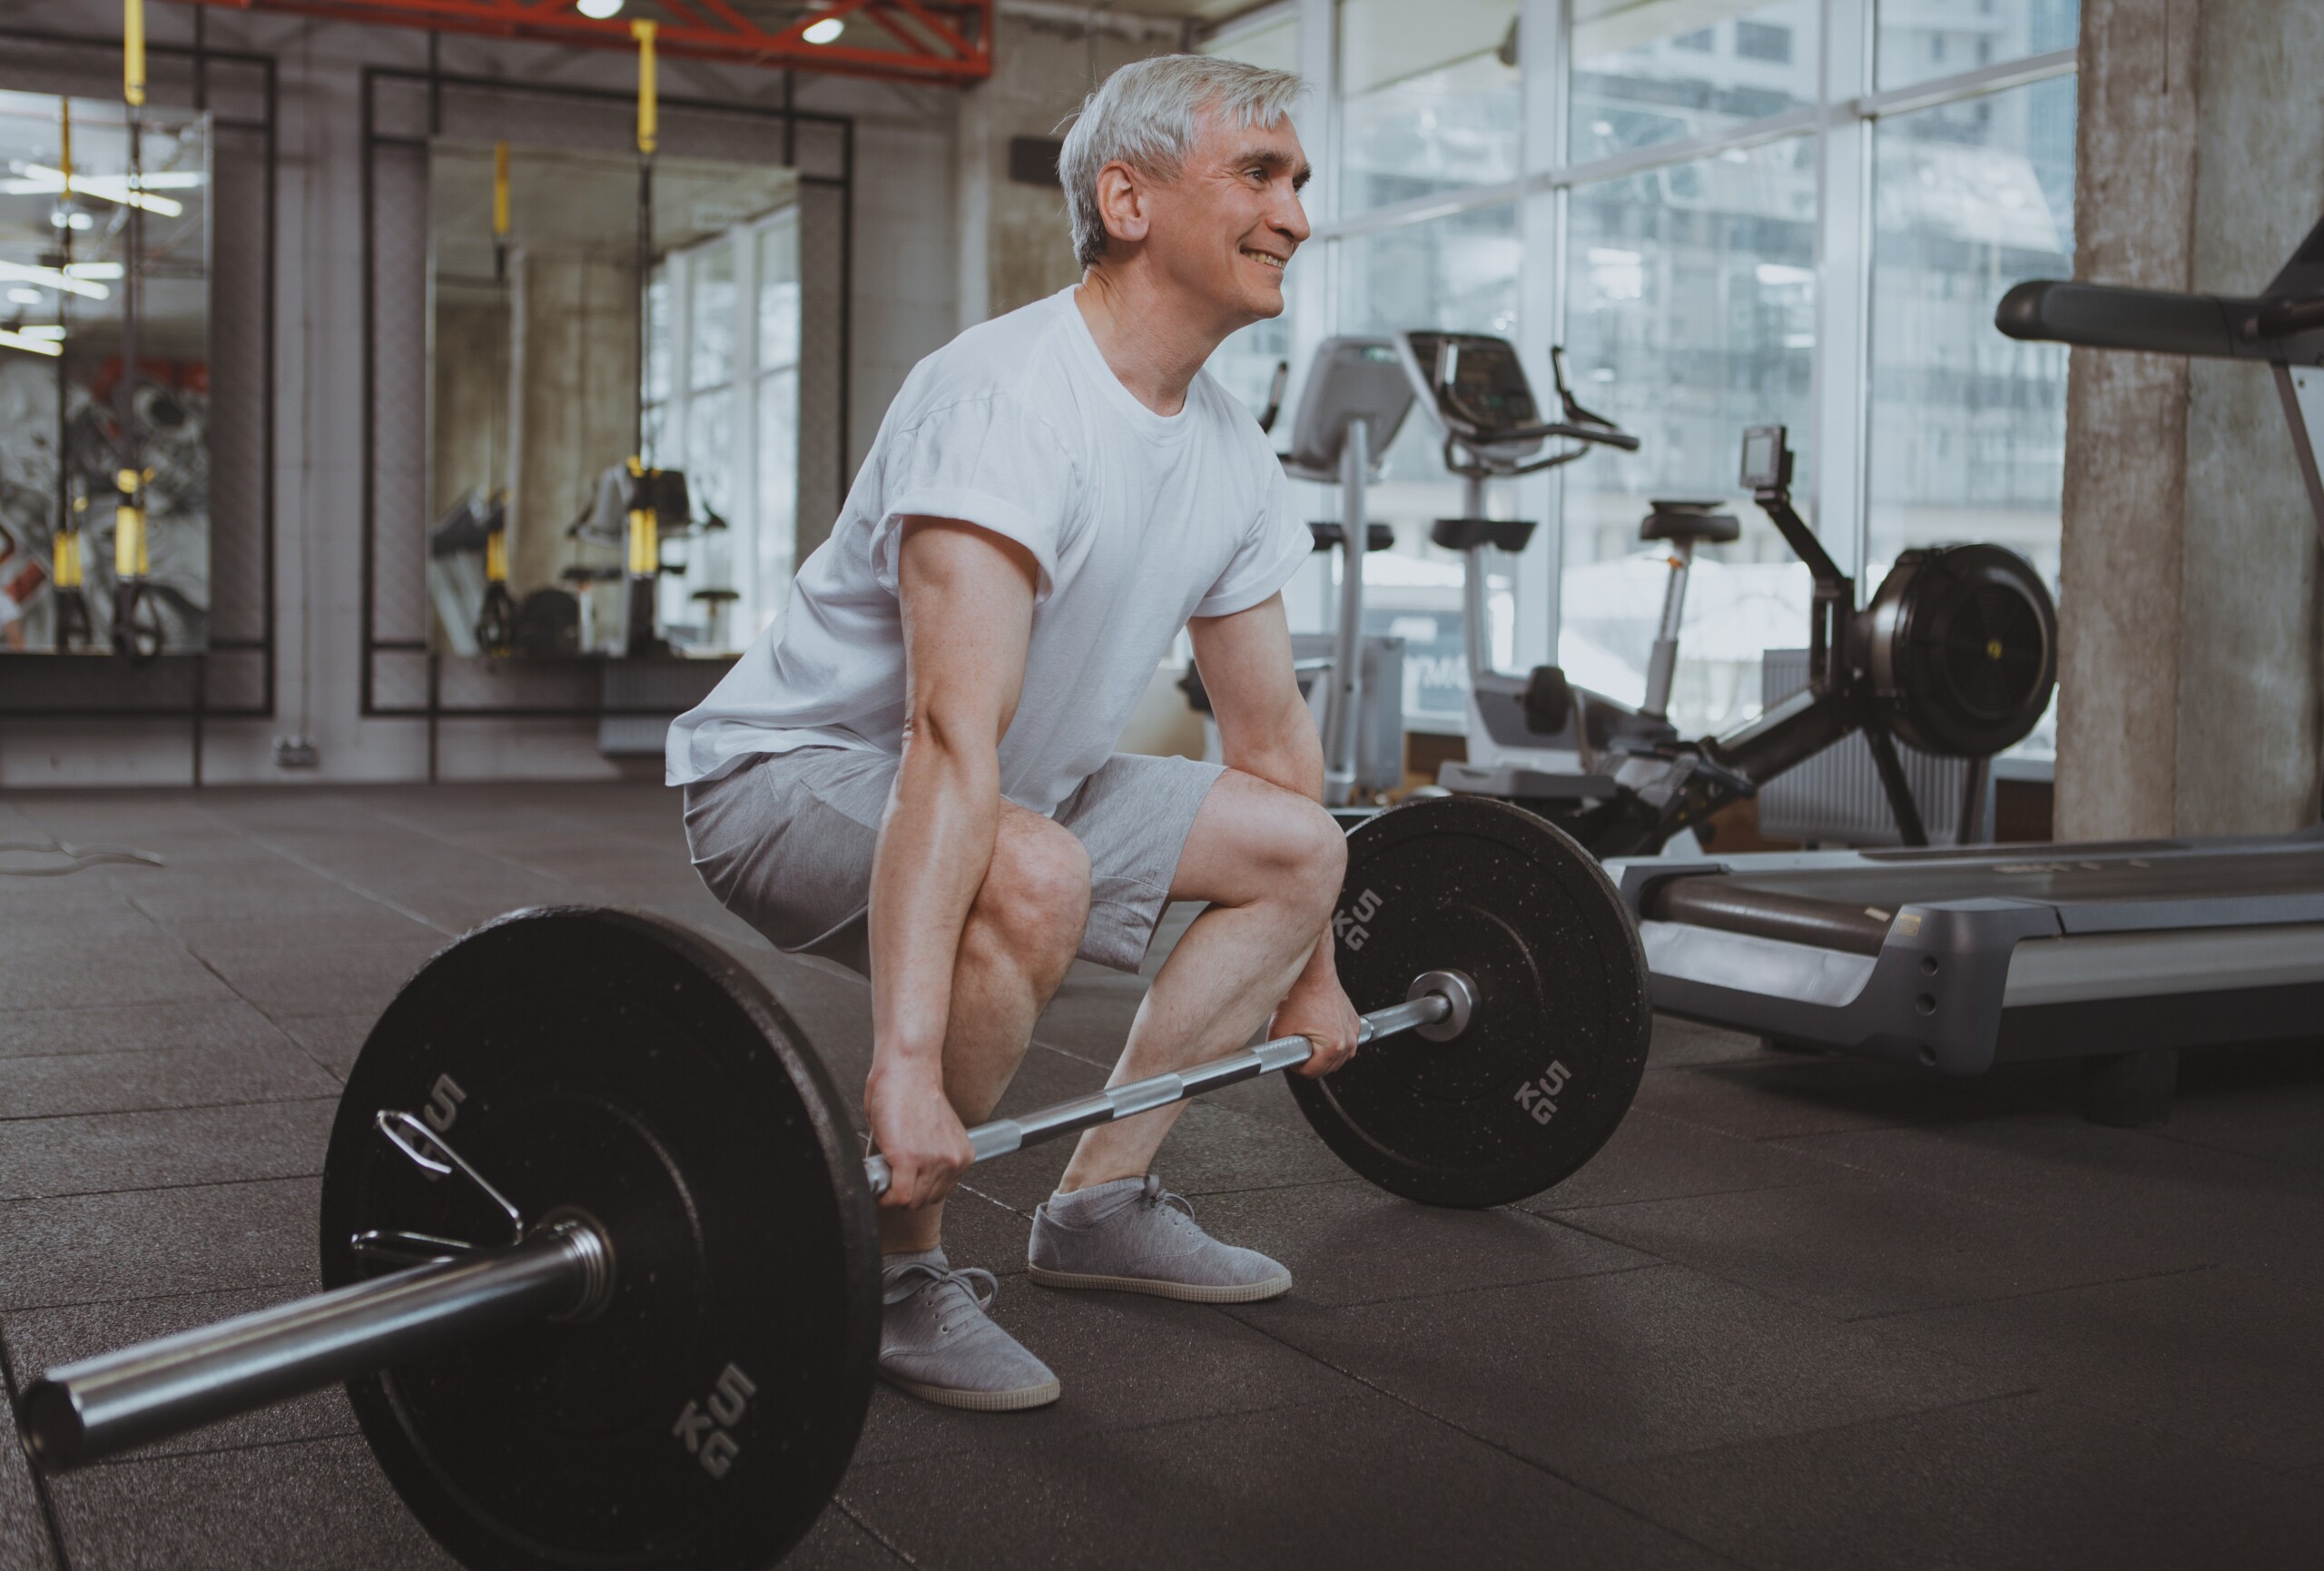 Aortic Aneurysm: Are Deadlifts Safe to Do?